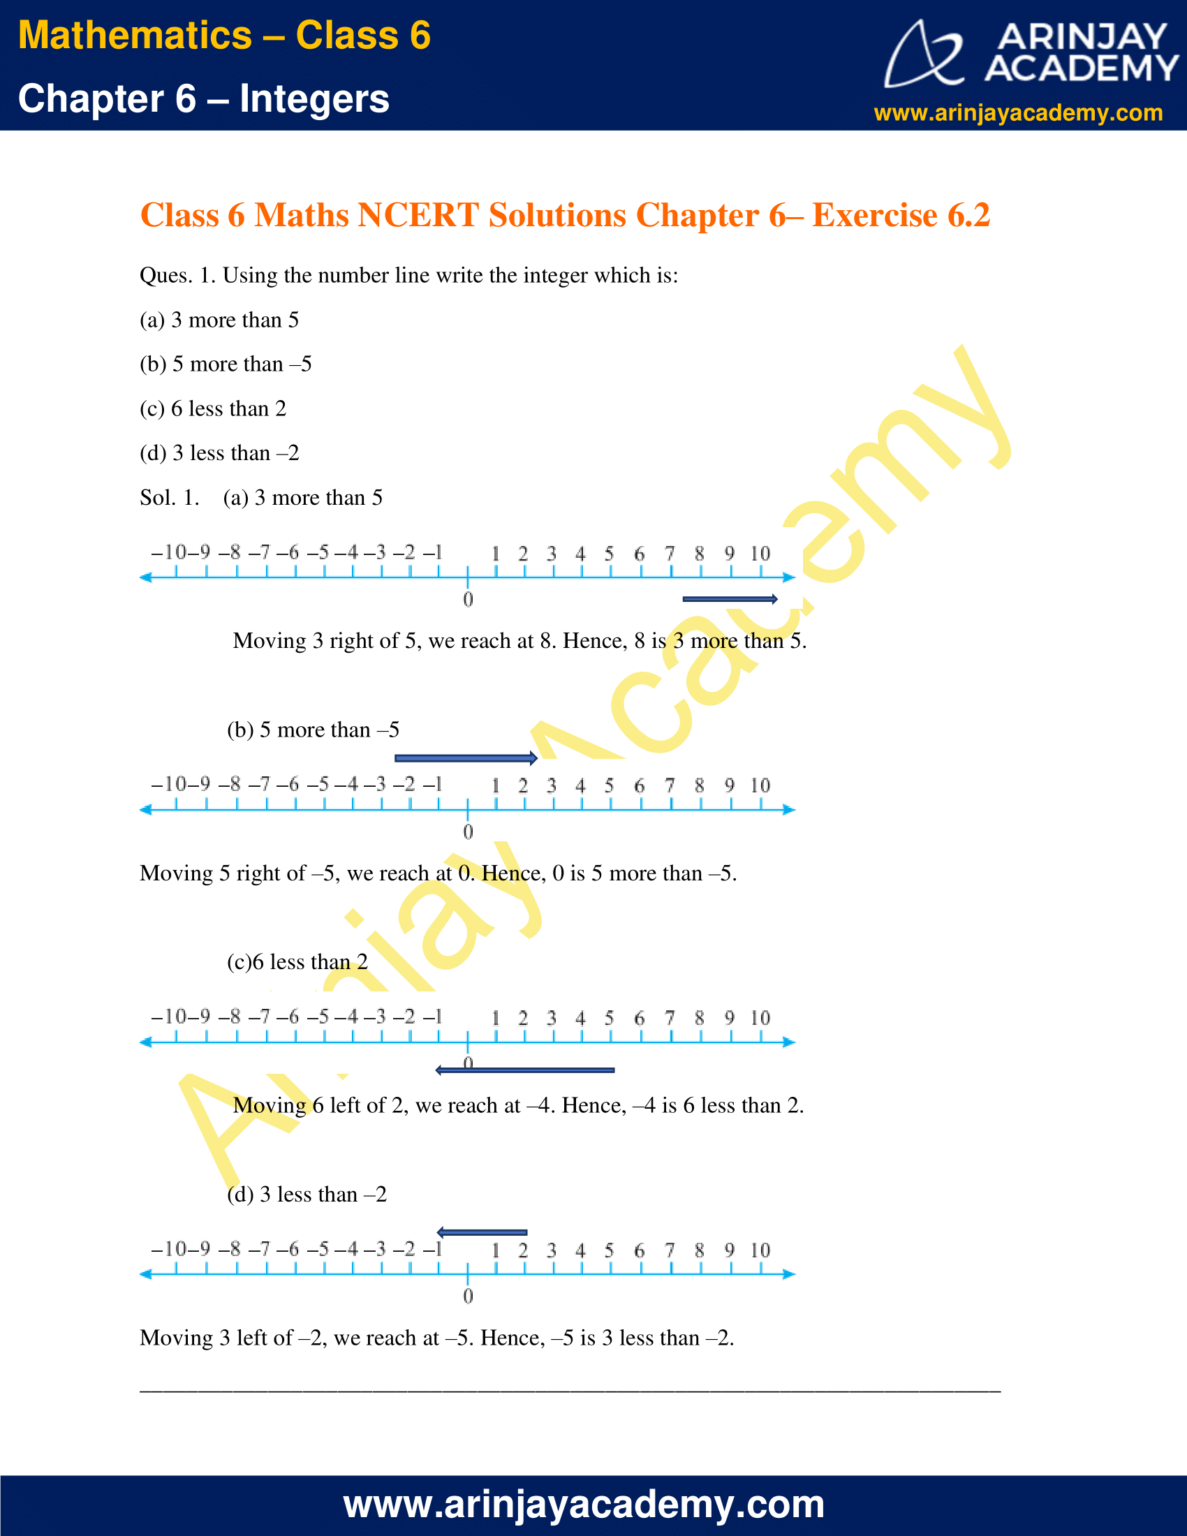 ncert-solutions-for-class-6-maths-chapter-6-download-pdf